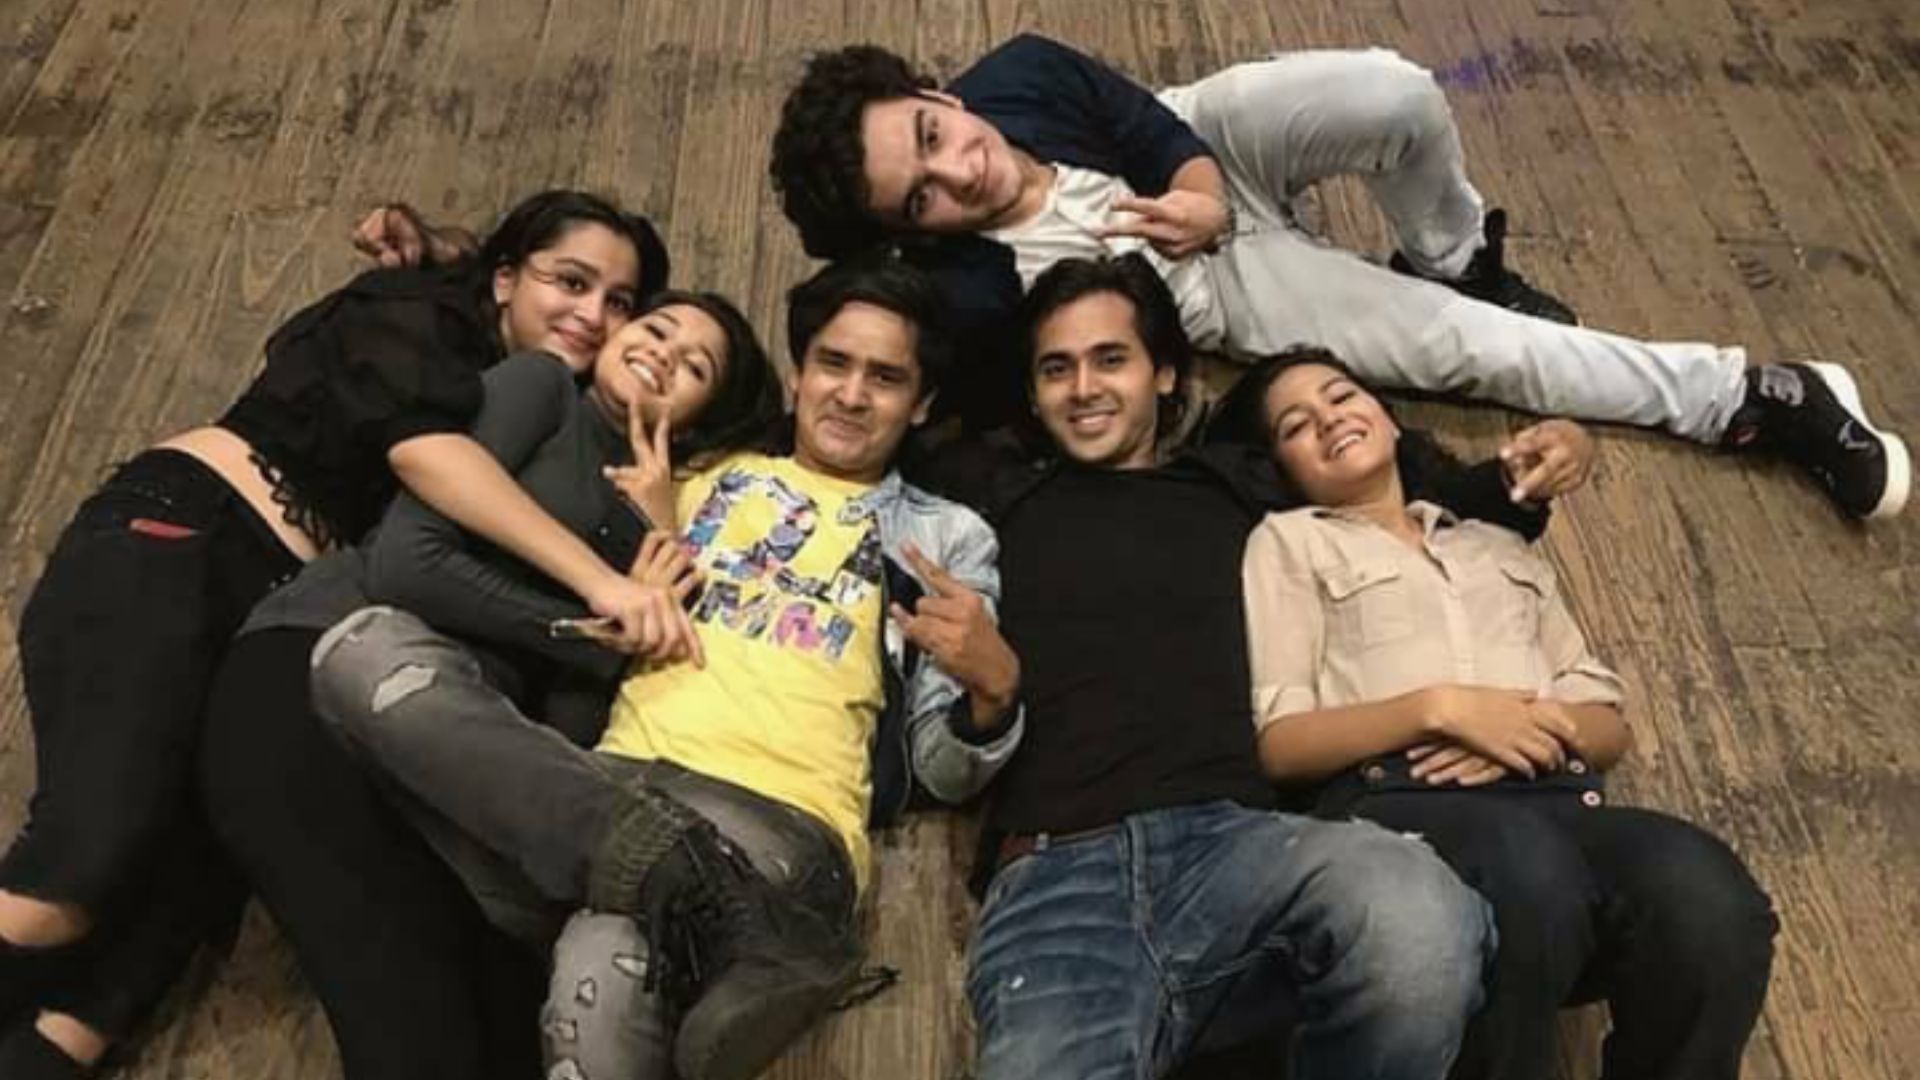 Raghav Dhir With Friends And Family Lying On Floor